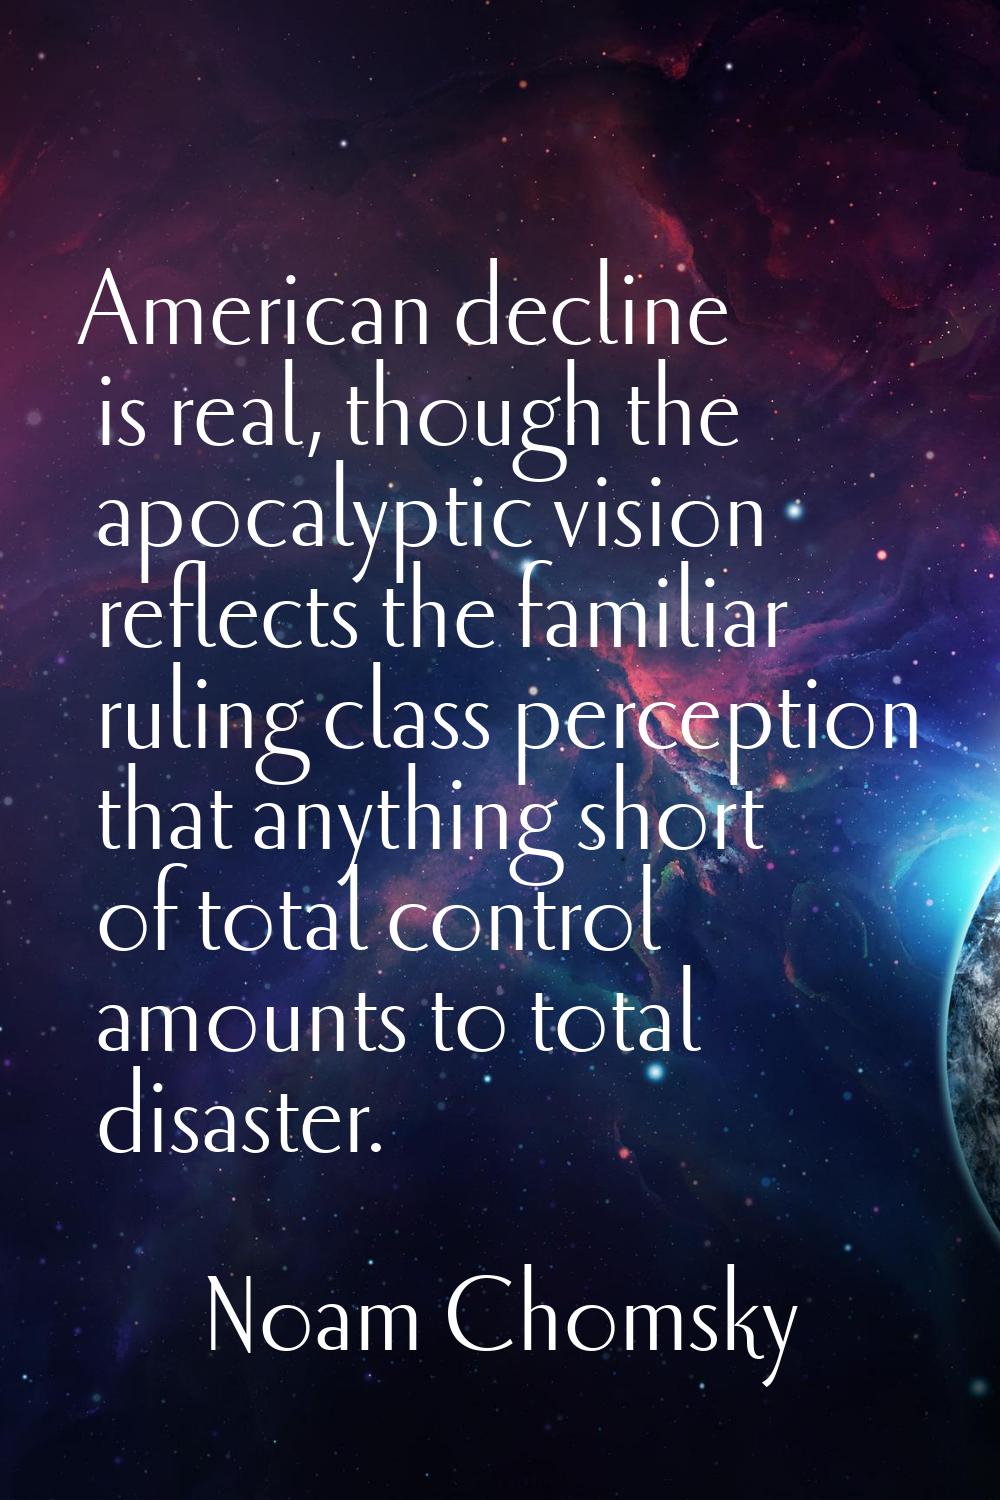 American decline is real, though the apocalyptic vision reflects the familiar ruling class percepti